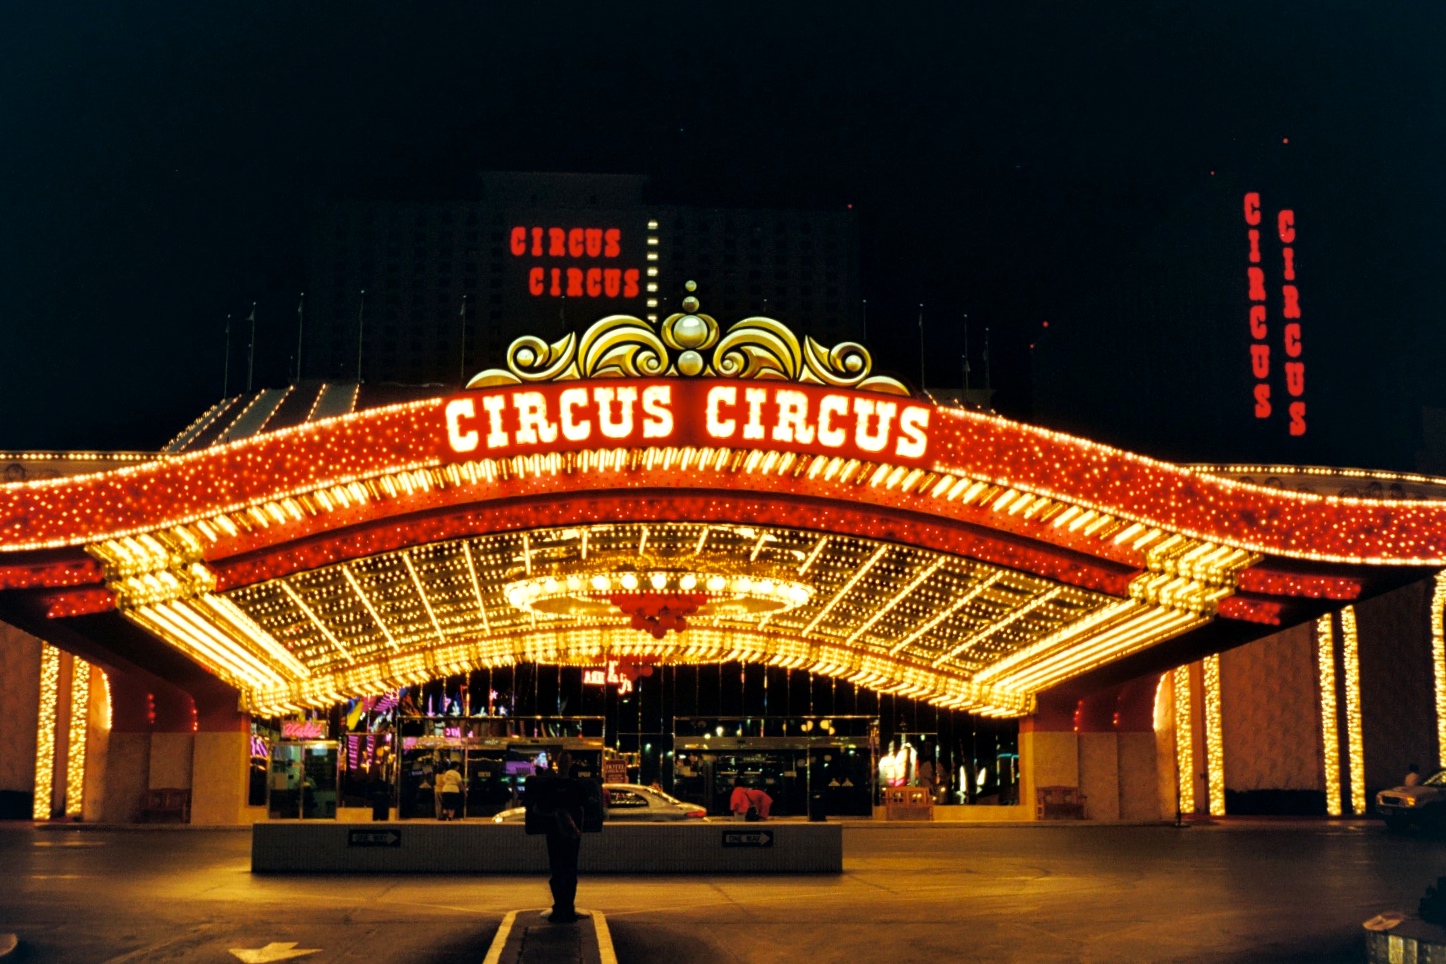 The heavily-lit canopy of Circus Circus hotel in Las Vegas, as featured in Fear and Loathing in Las Vegas.